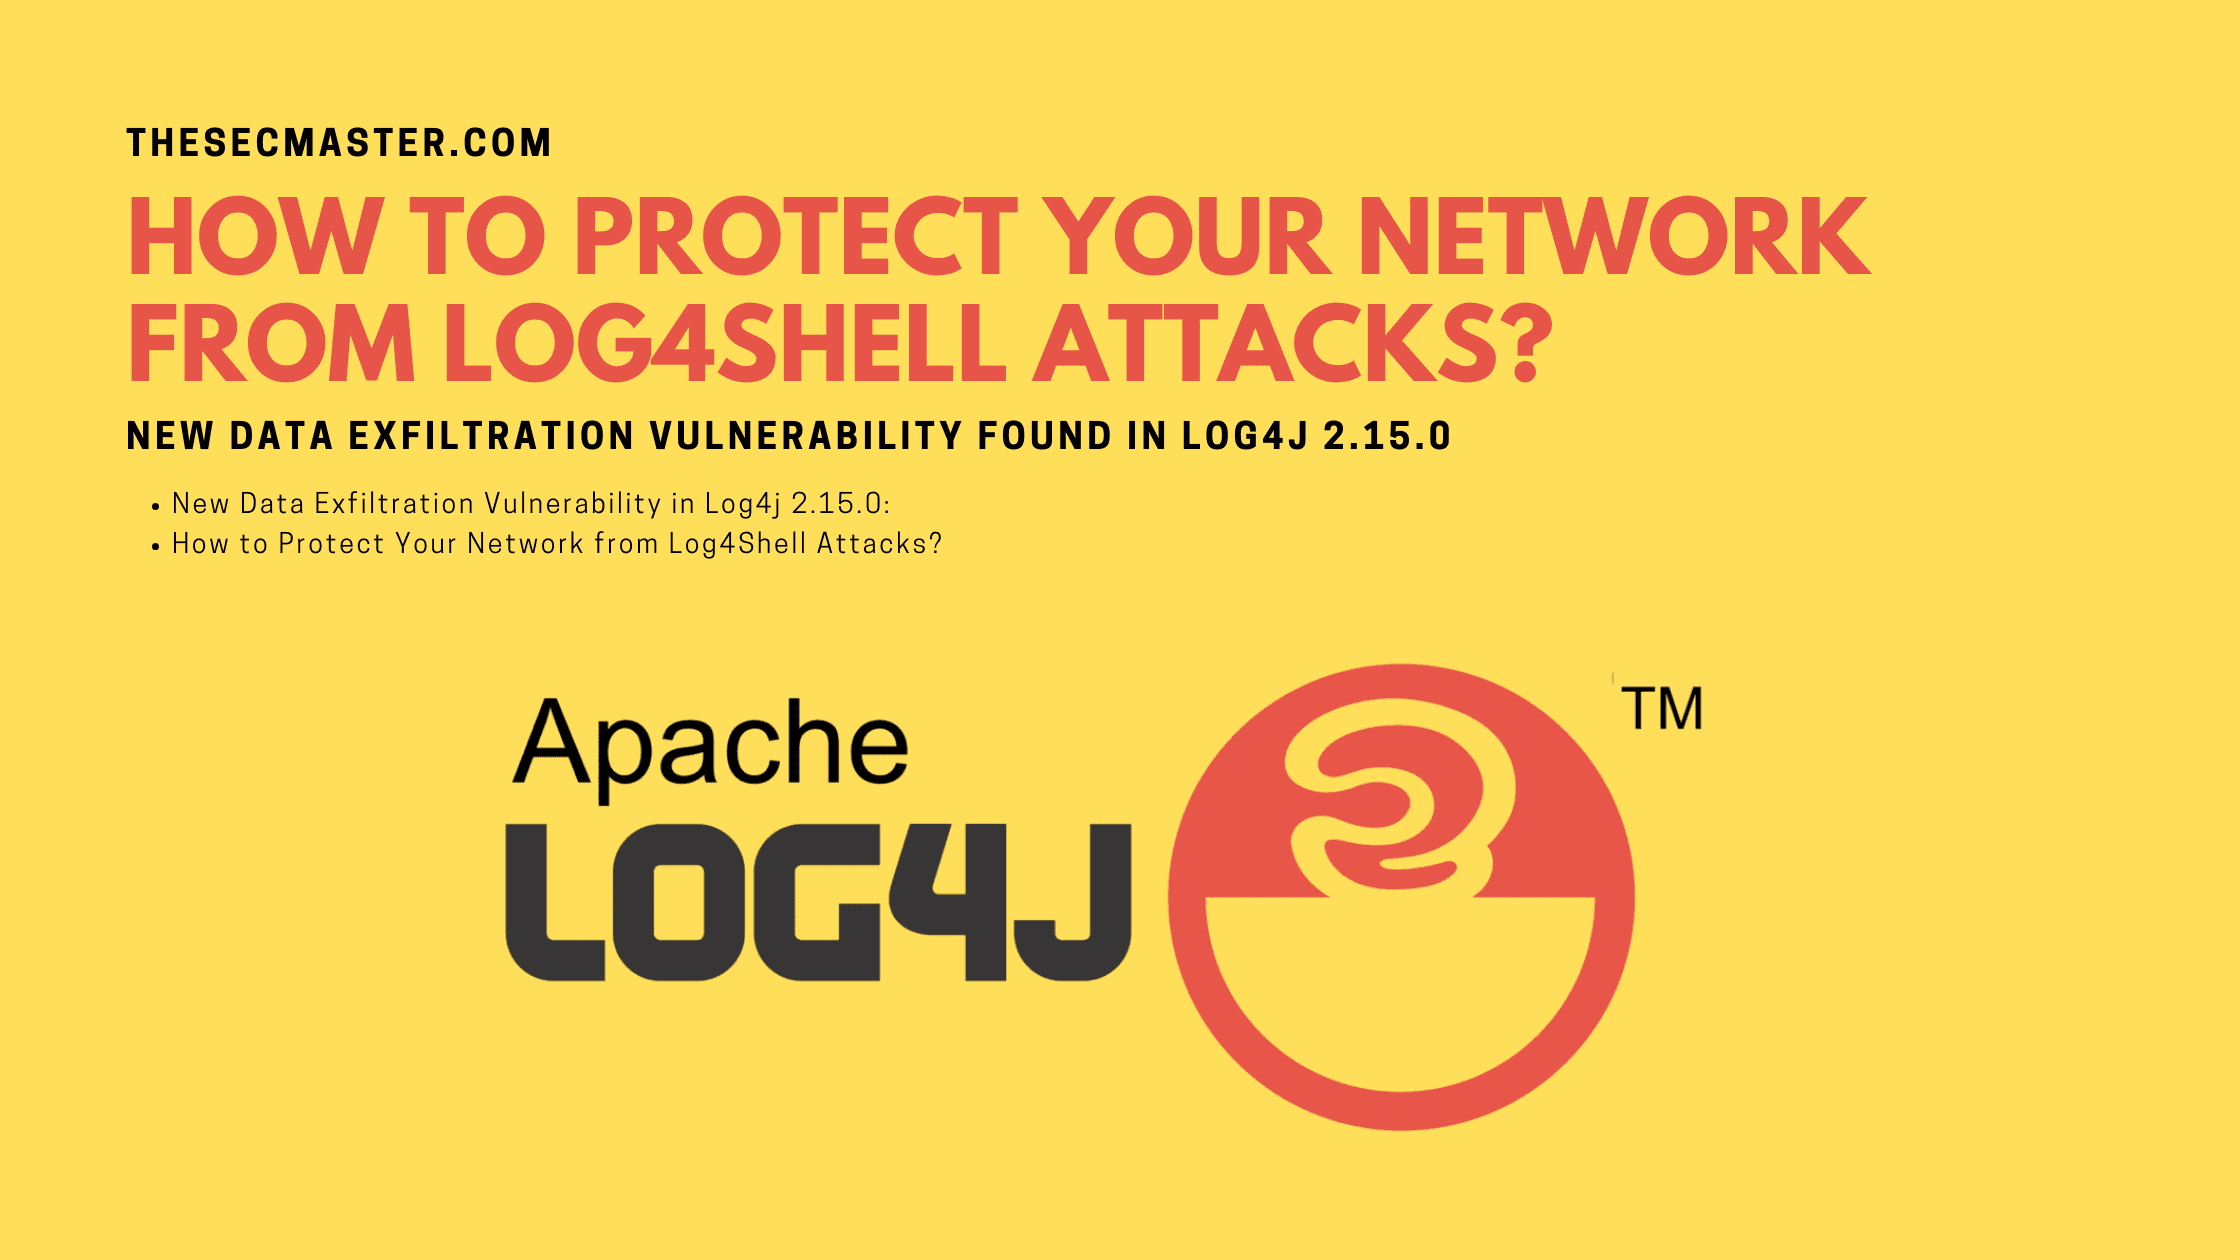 How To Protect Your Network From Log4shell Attacks